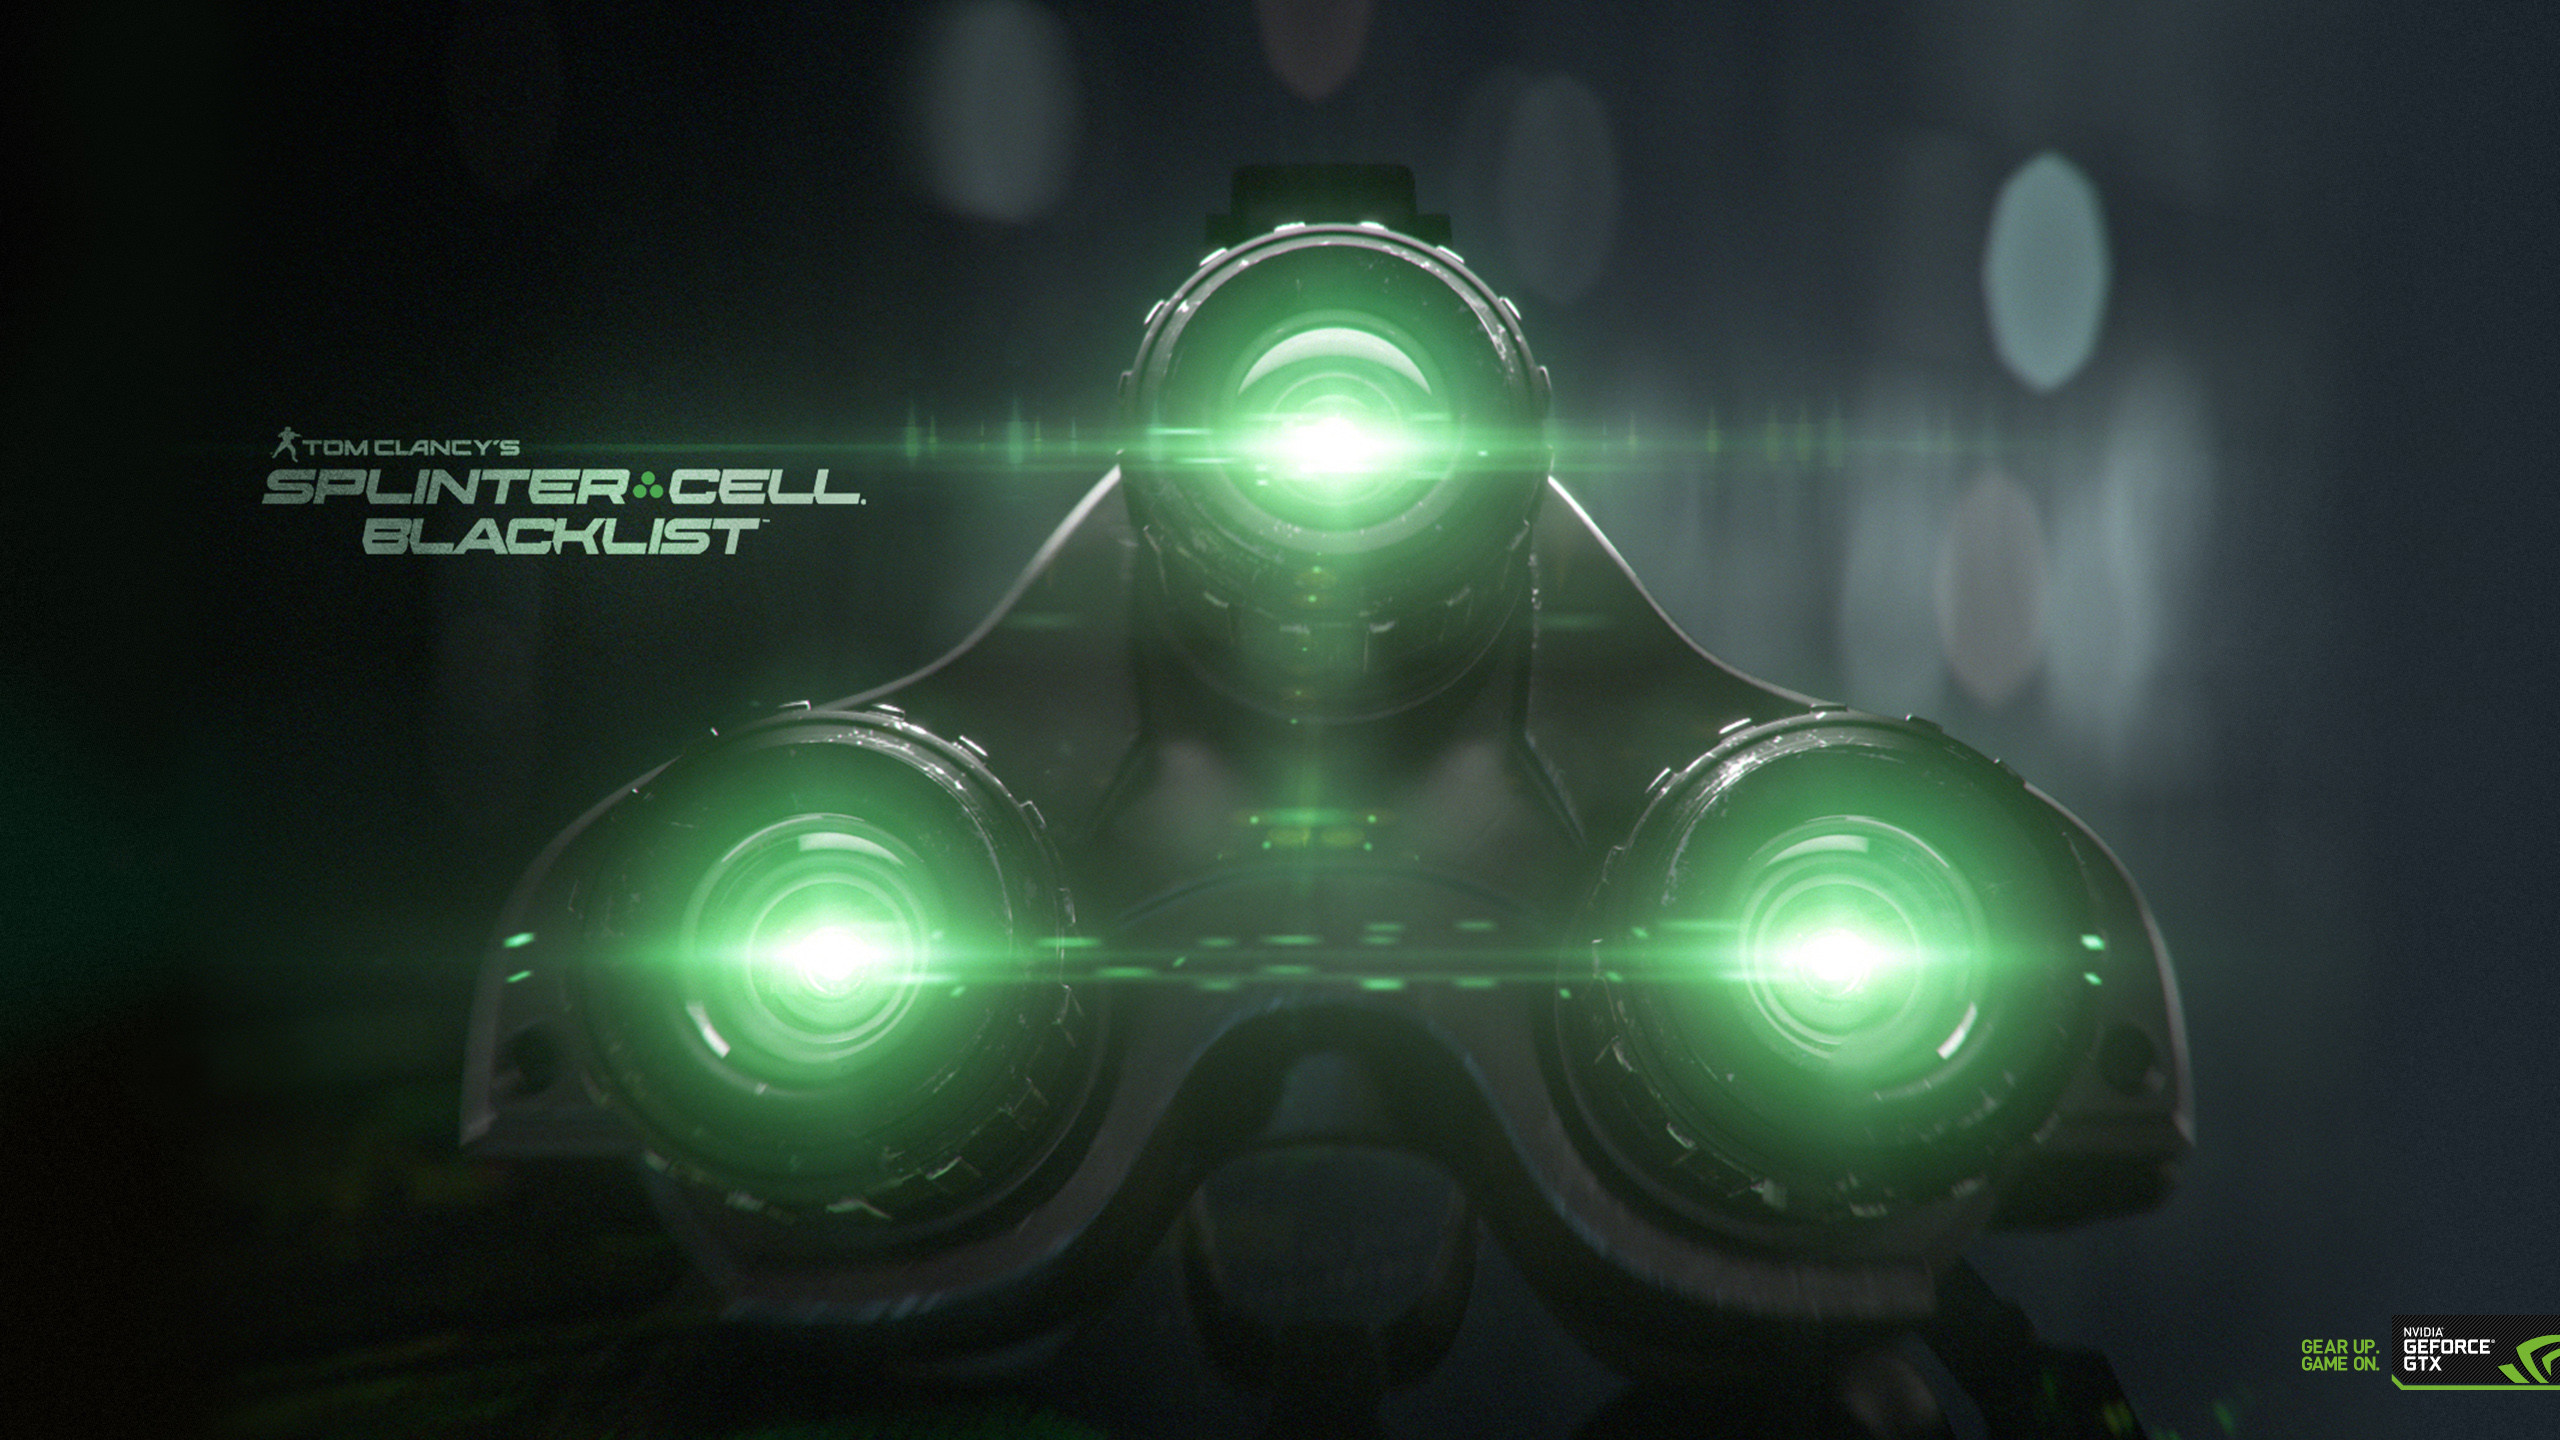 2560x1440 Final Set of GeForce Exclusive Tom Clancy's Splinter Cell Blacklist  Wallpaper Now Available